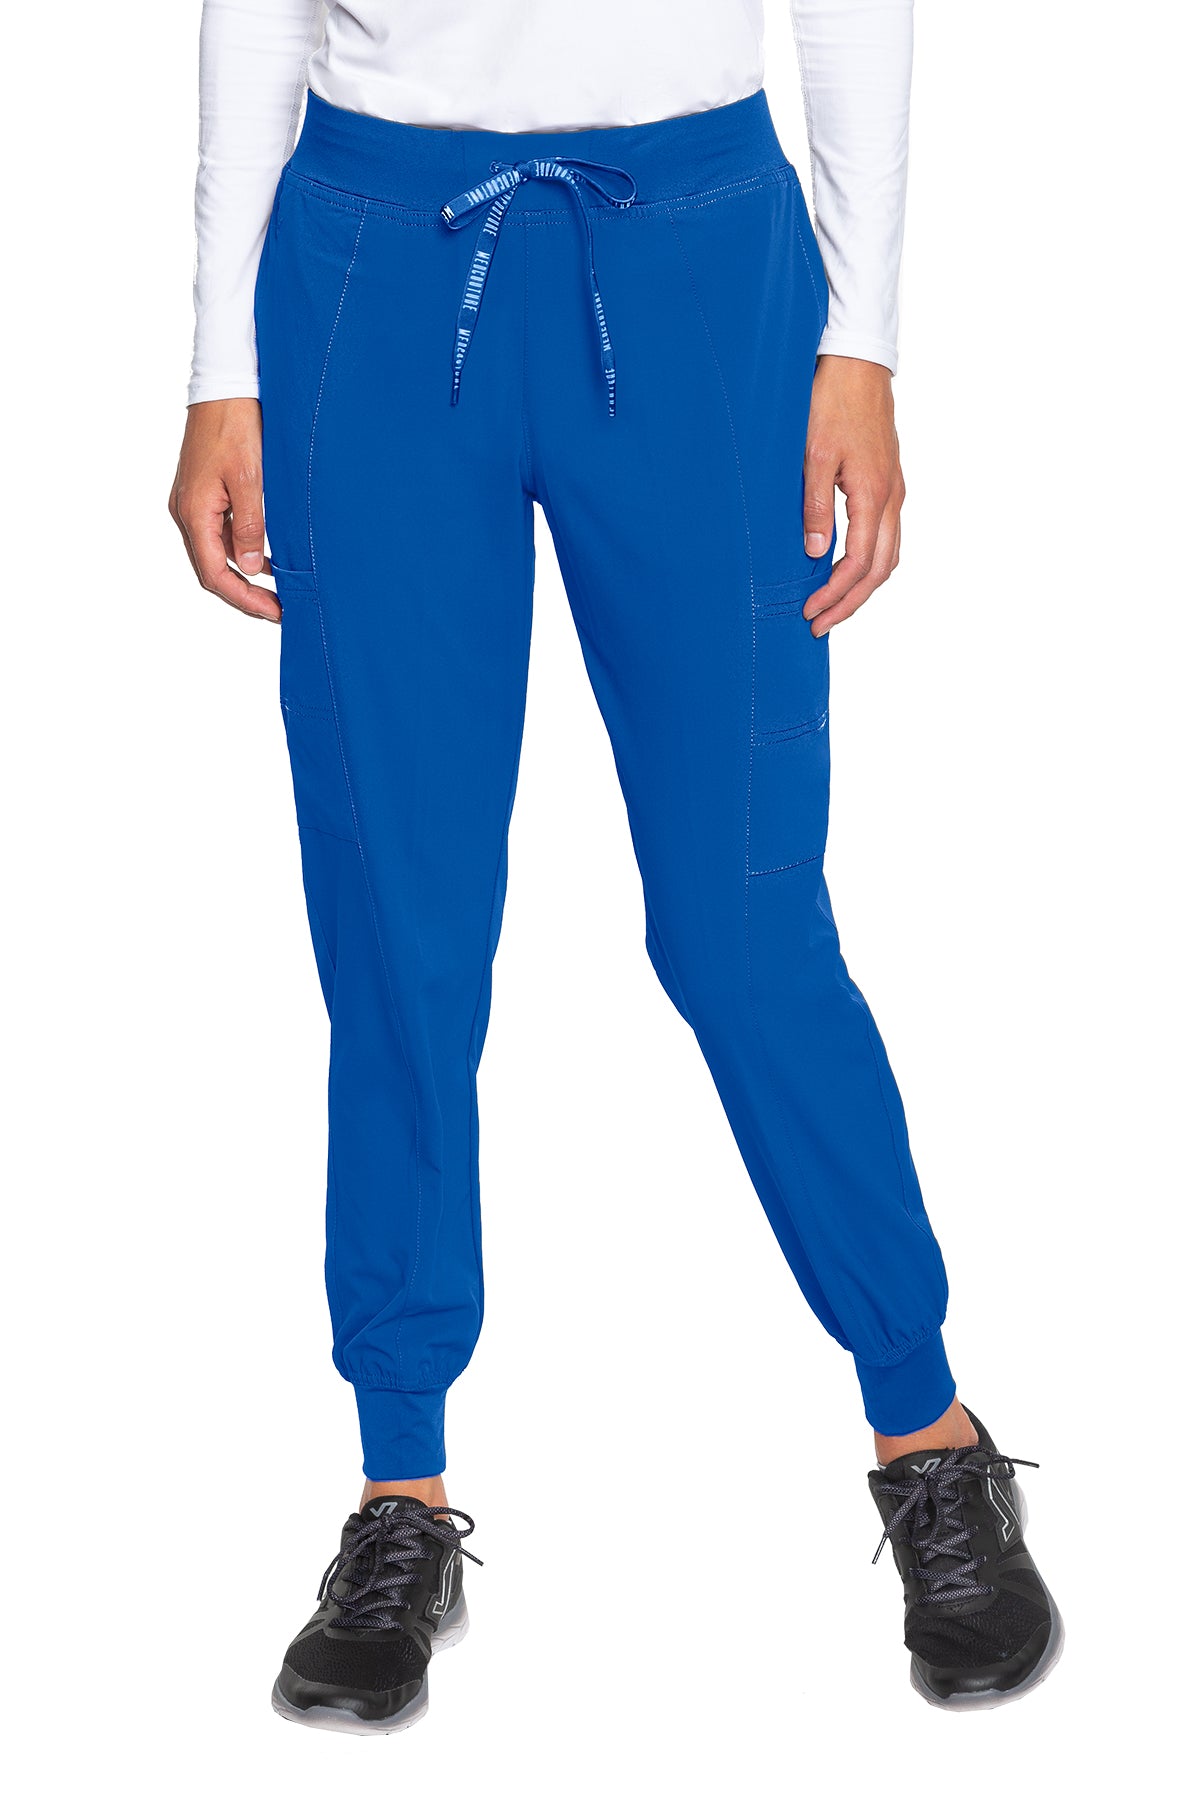 MED COUTURE Seamed Jogger #8721 - Butterfly Touch Scrubs